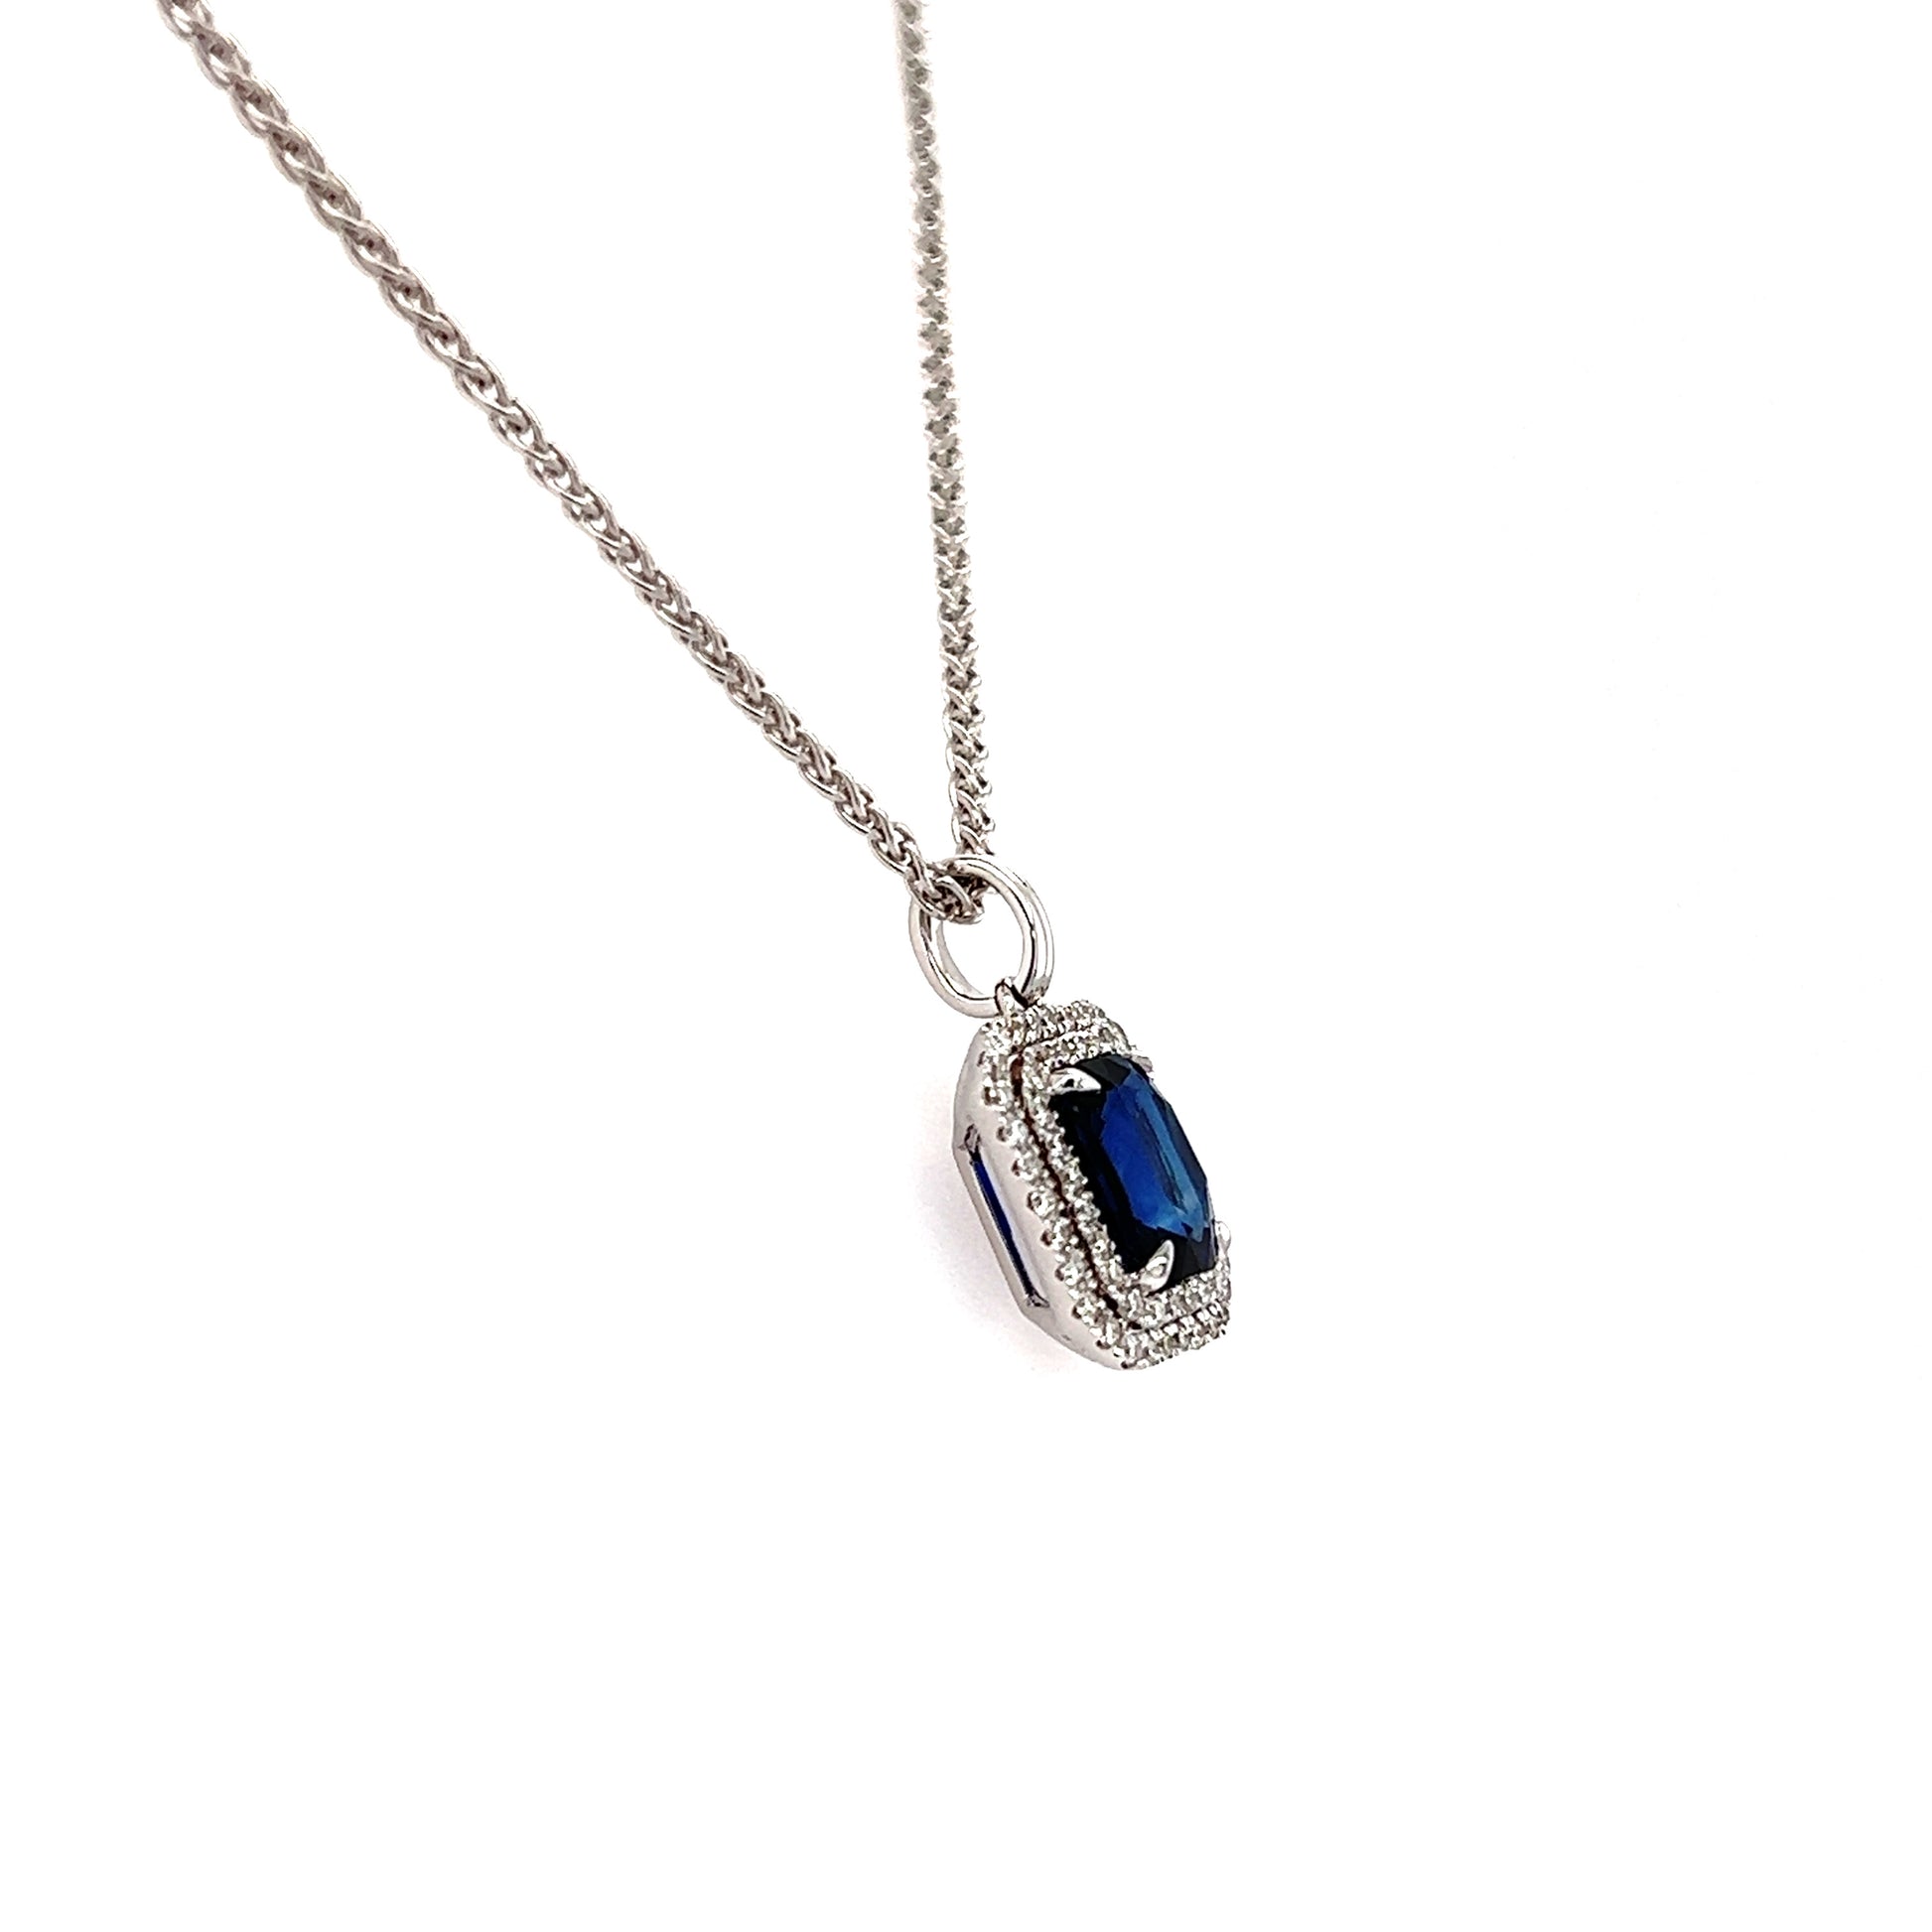 Cushion Sapphire Pendant with Double Diamond Halo in 18K White Gold Pendant and Chain Right Profile View